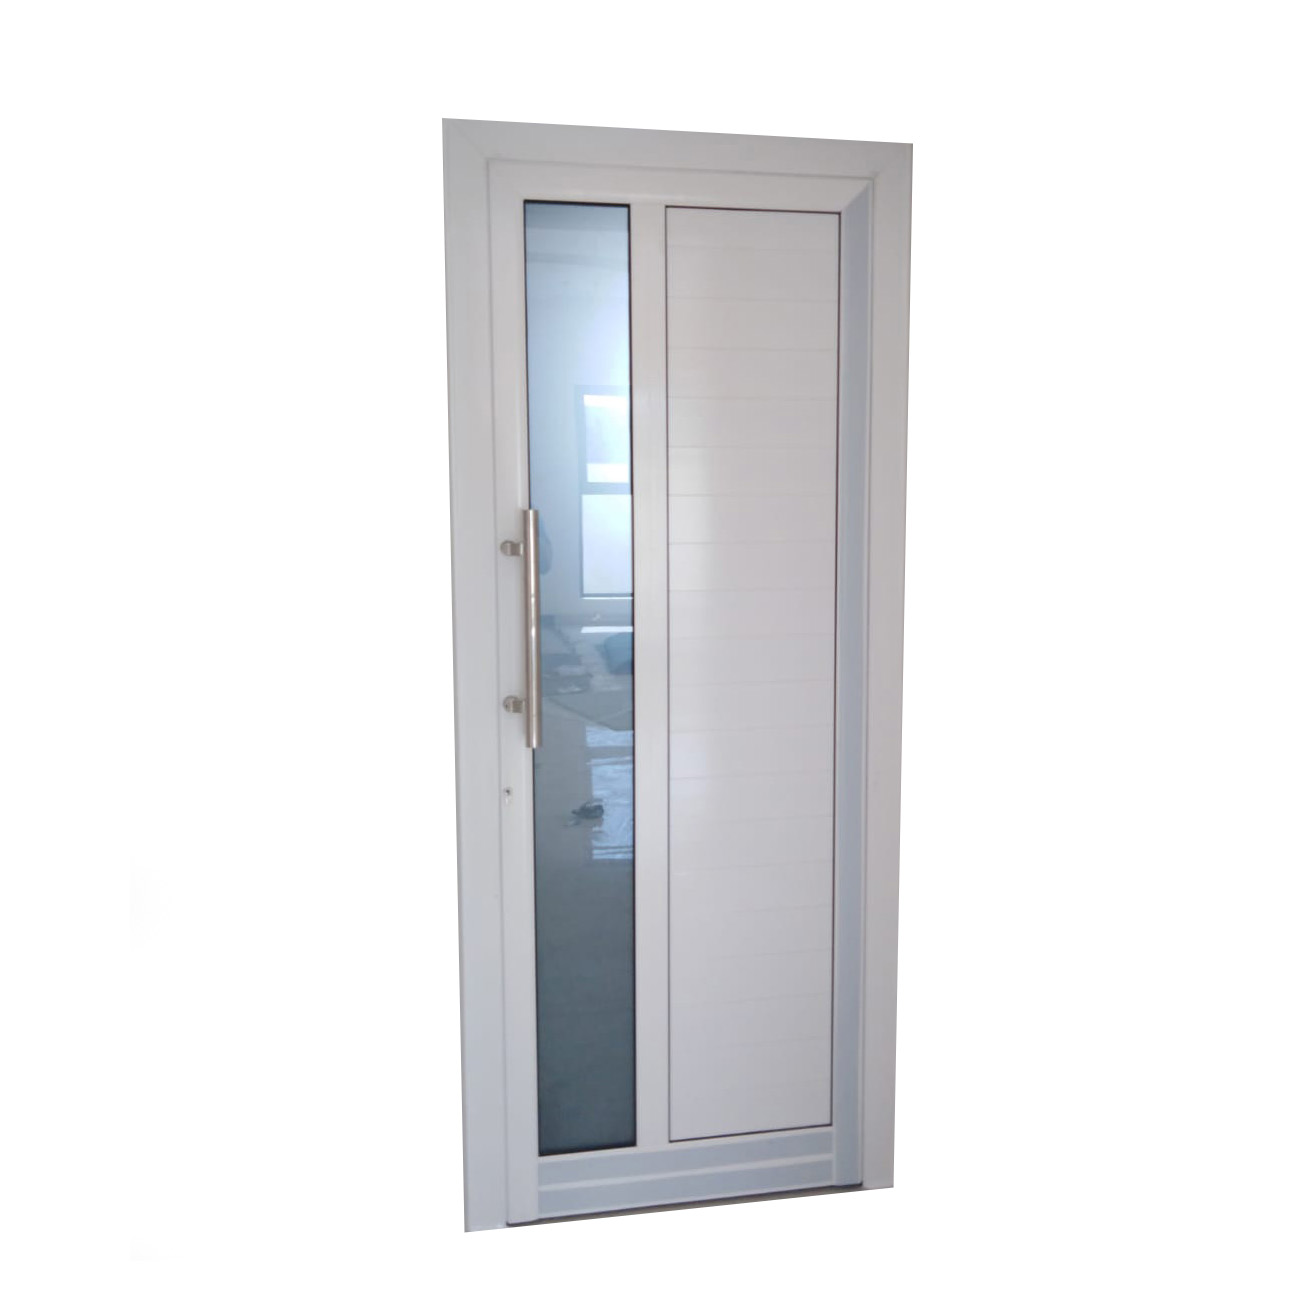 Buy White Frame Door with Glass Online | Manufacturing Production Services | Qetaat.com